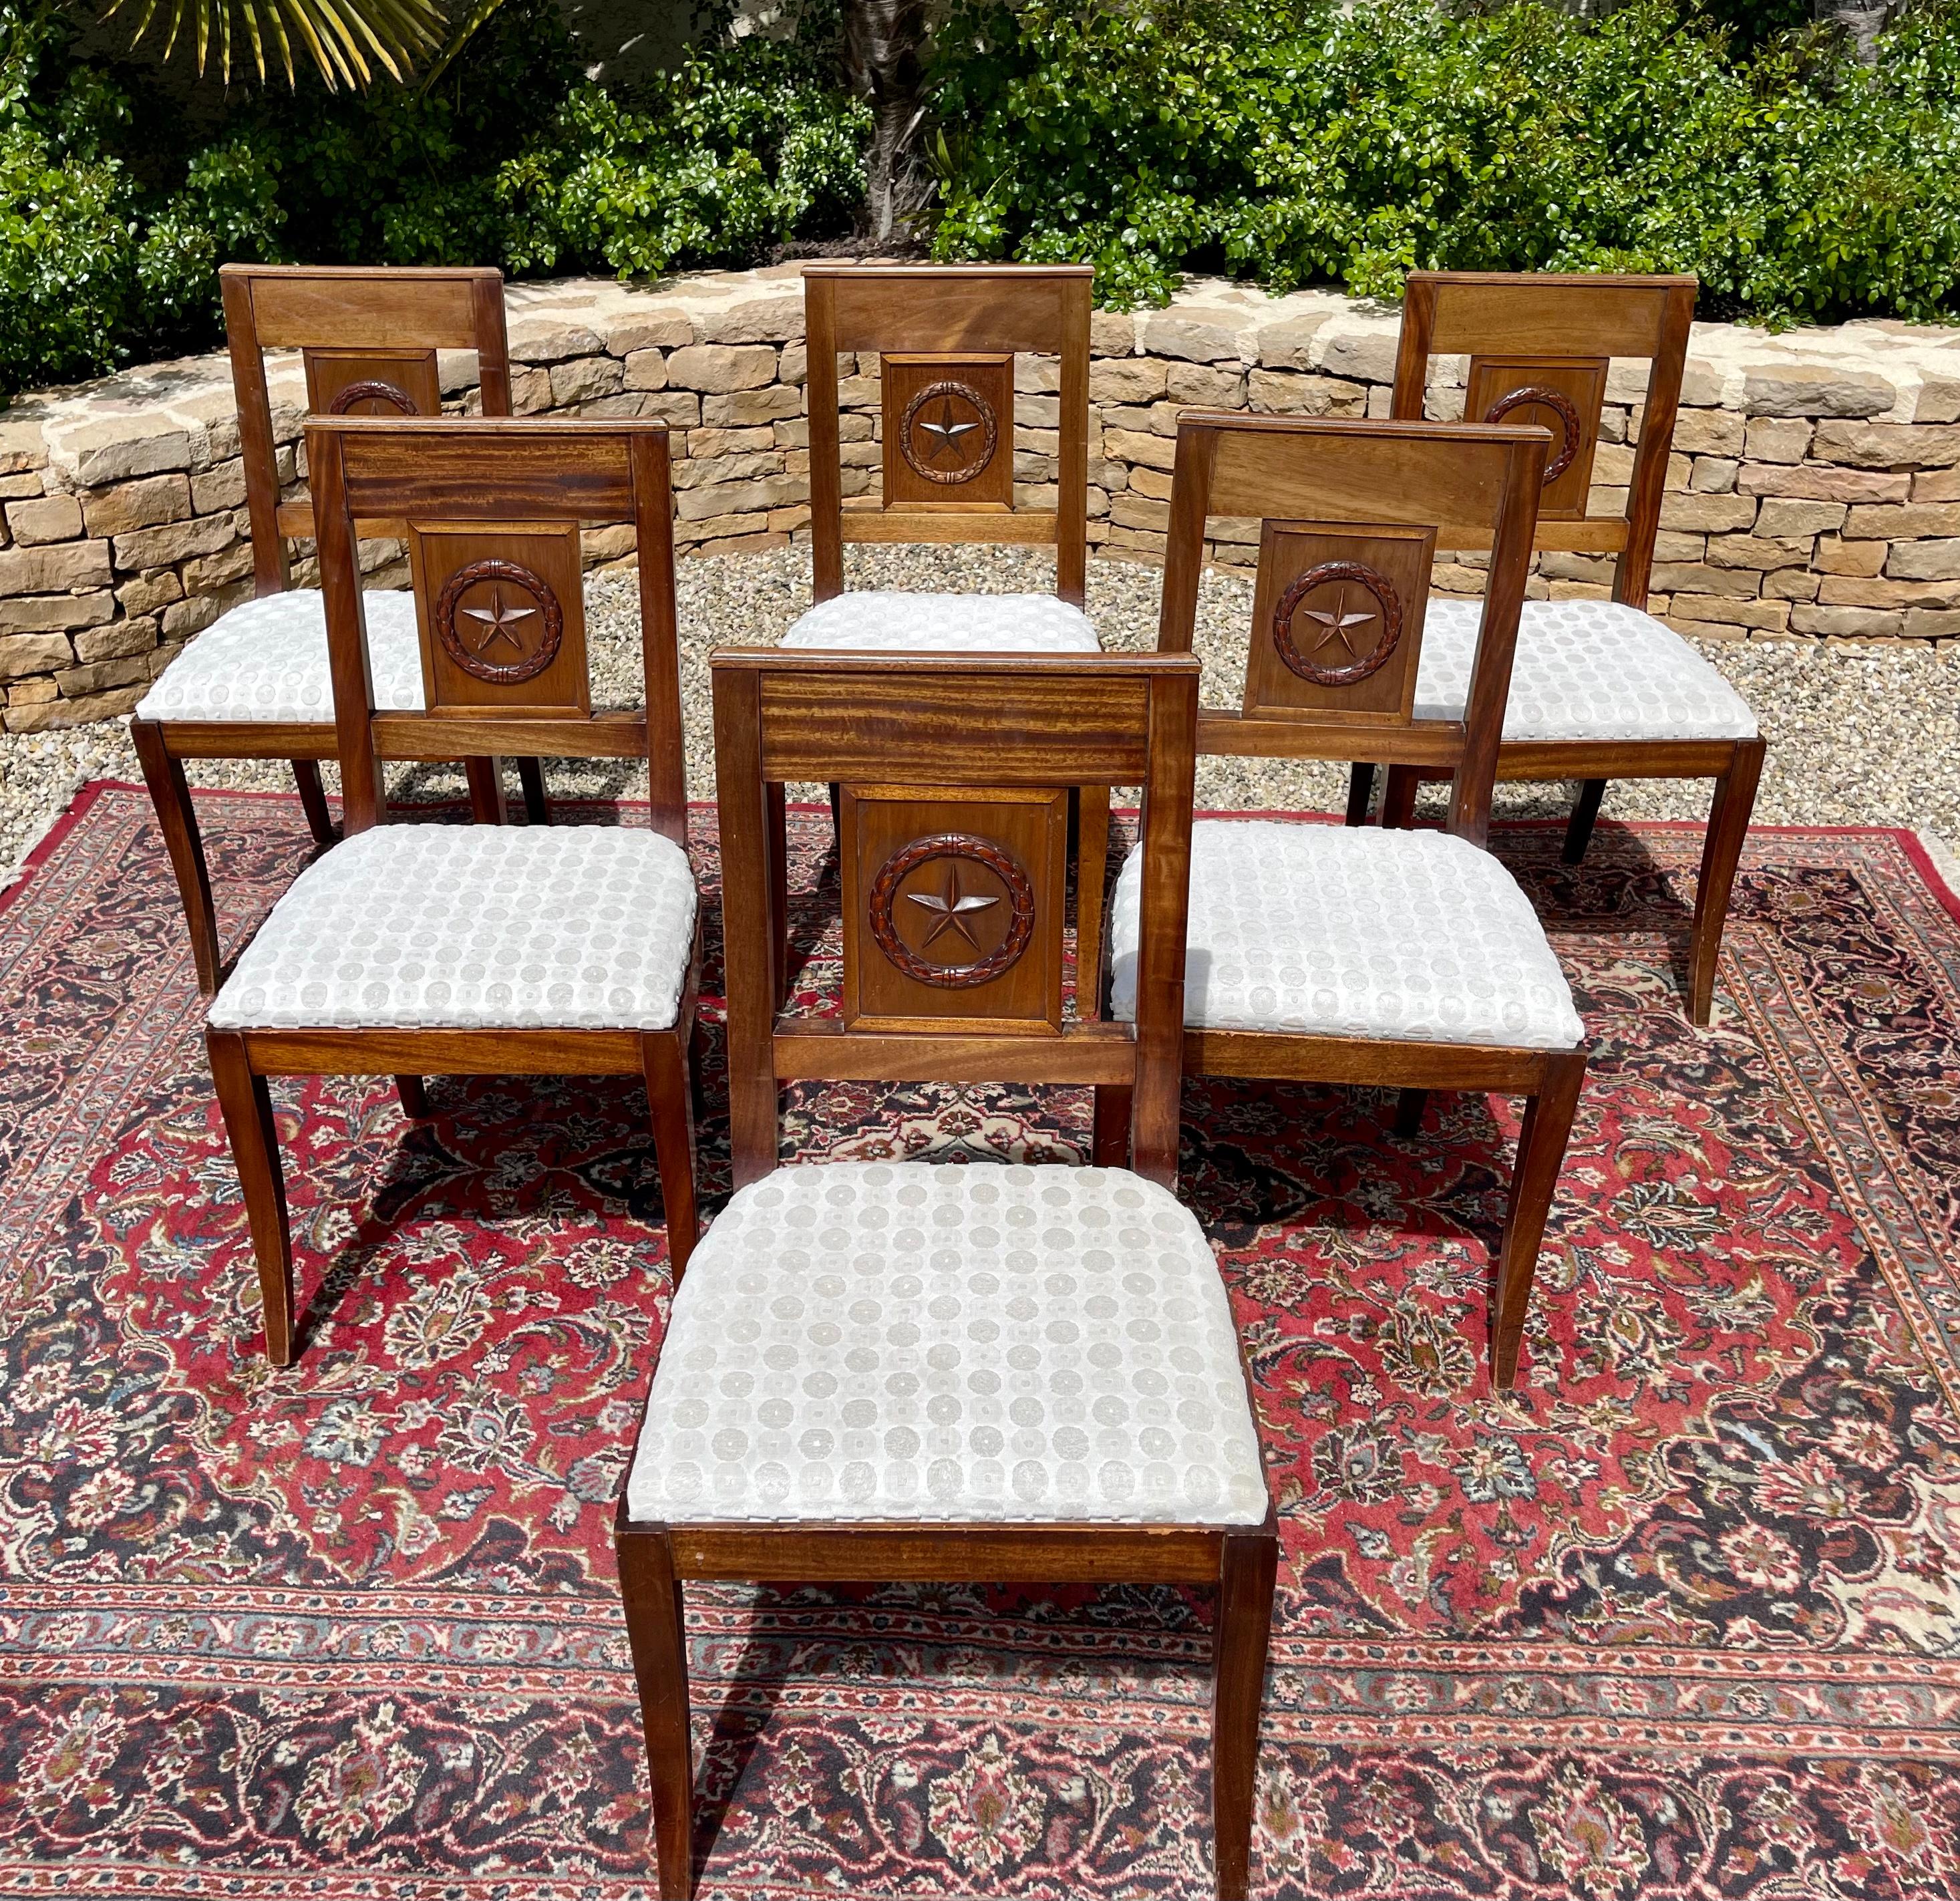 Suite of 6 Directoire style mahogany chairs. The seats are covered with a fabric. They are in good condition.